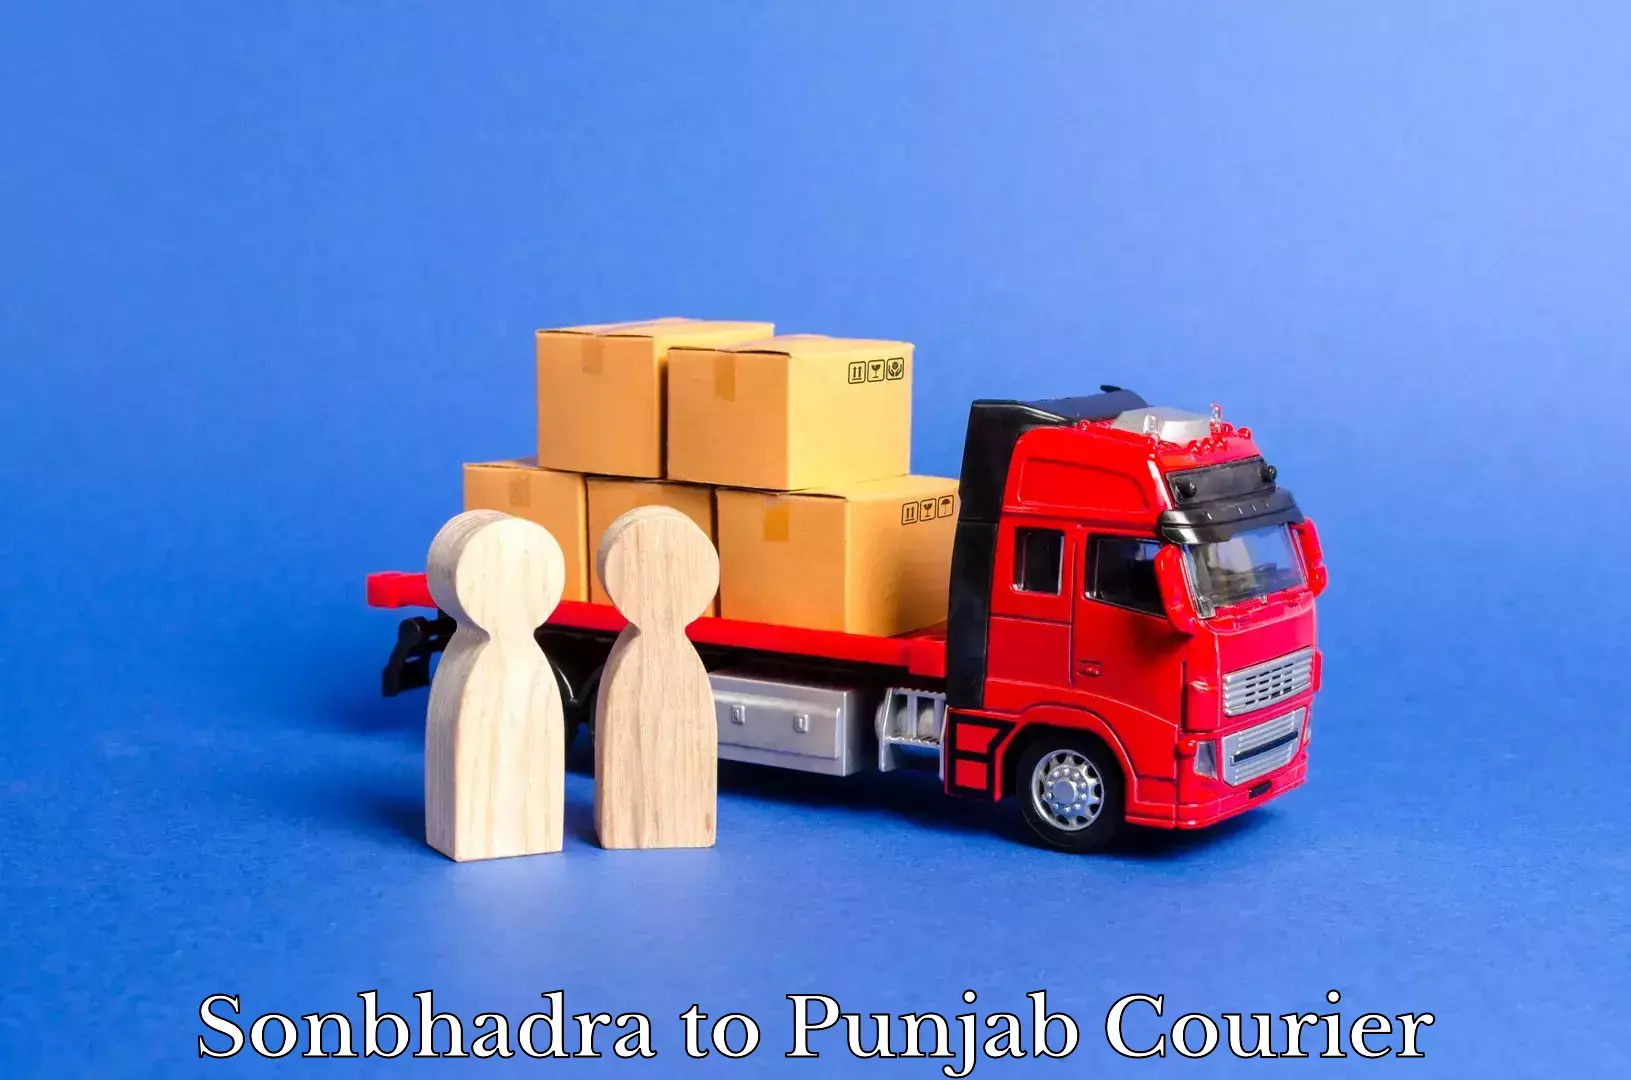 Global delivery options in Sonbhadra to Punjab